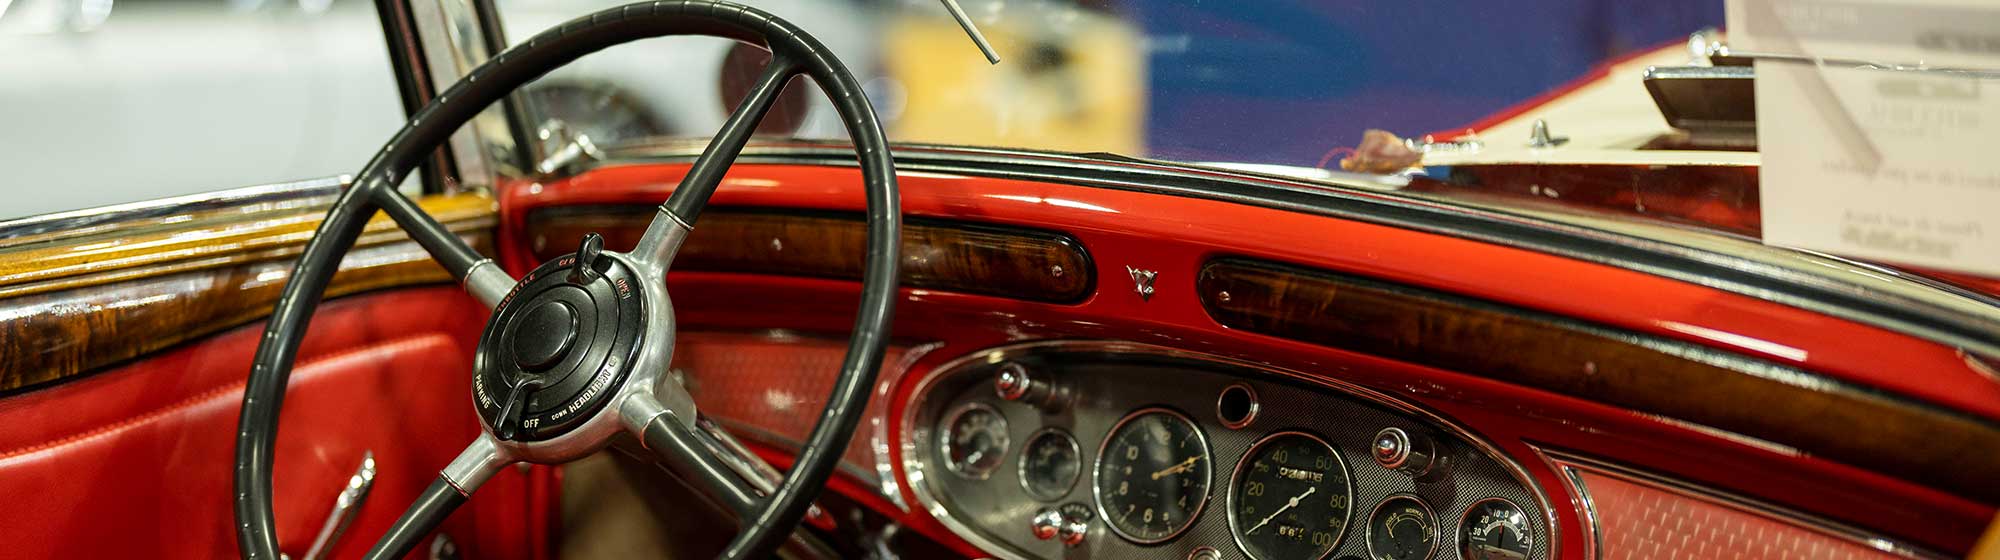 Collector car available to buy at the Rétromobile show